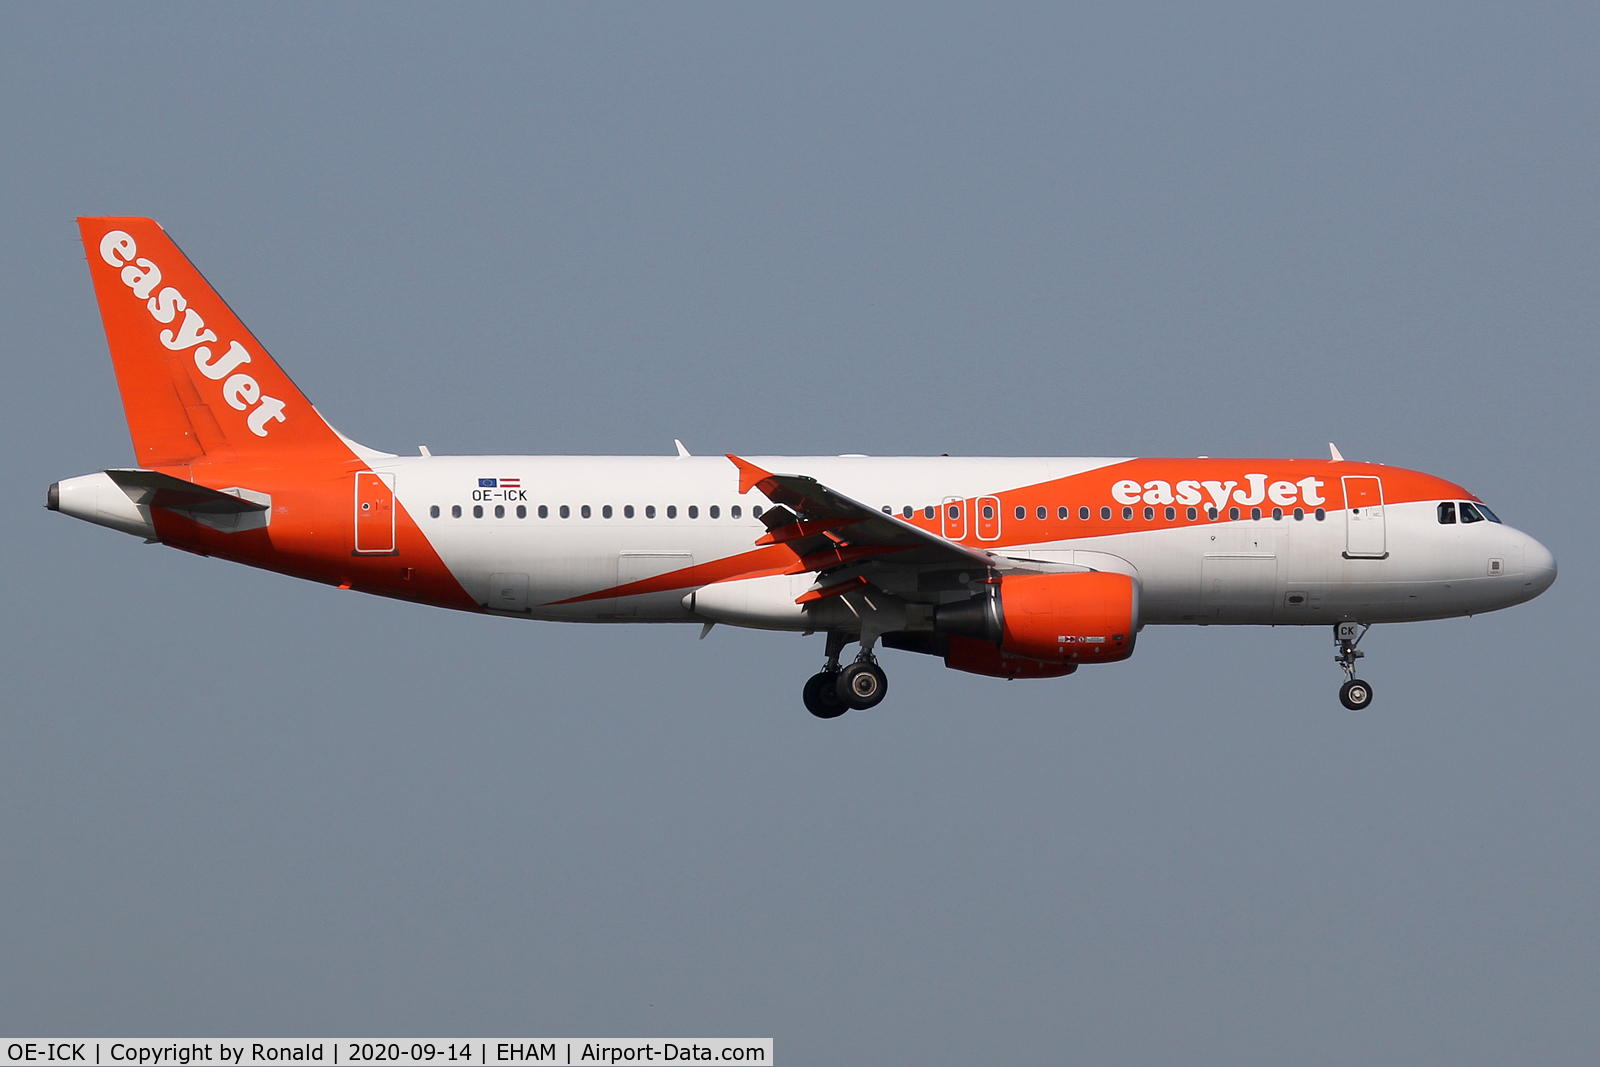 OE-ICK, 2012 Airbus A320-214 C/N 5020, at spl